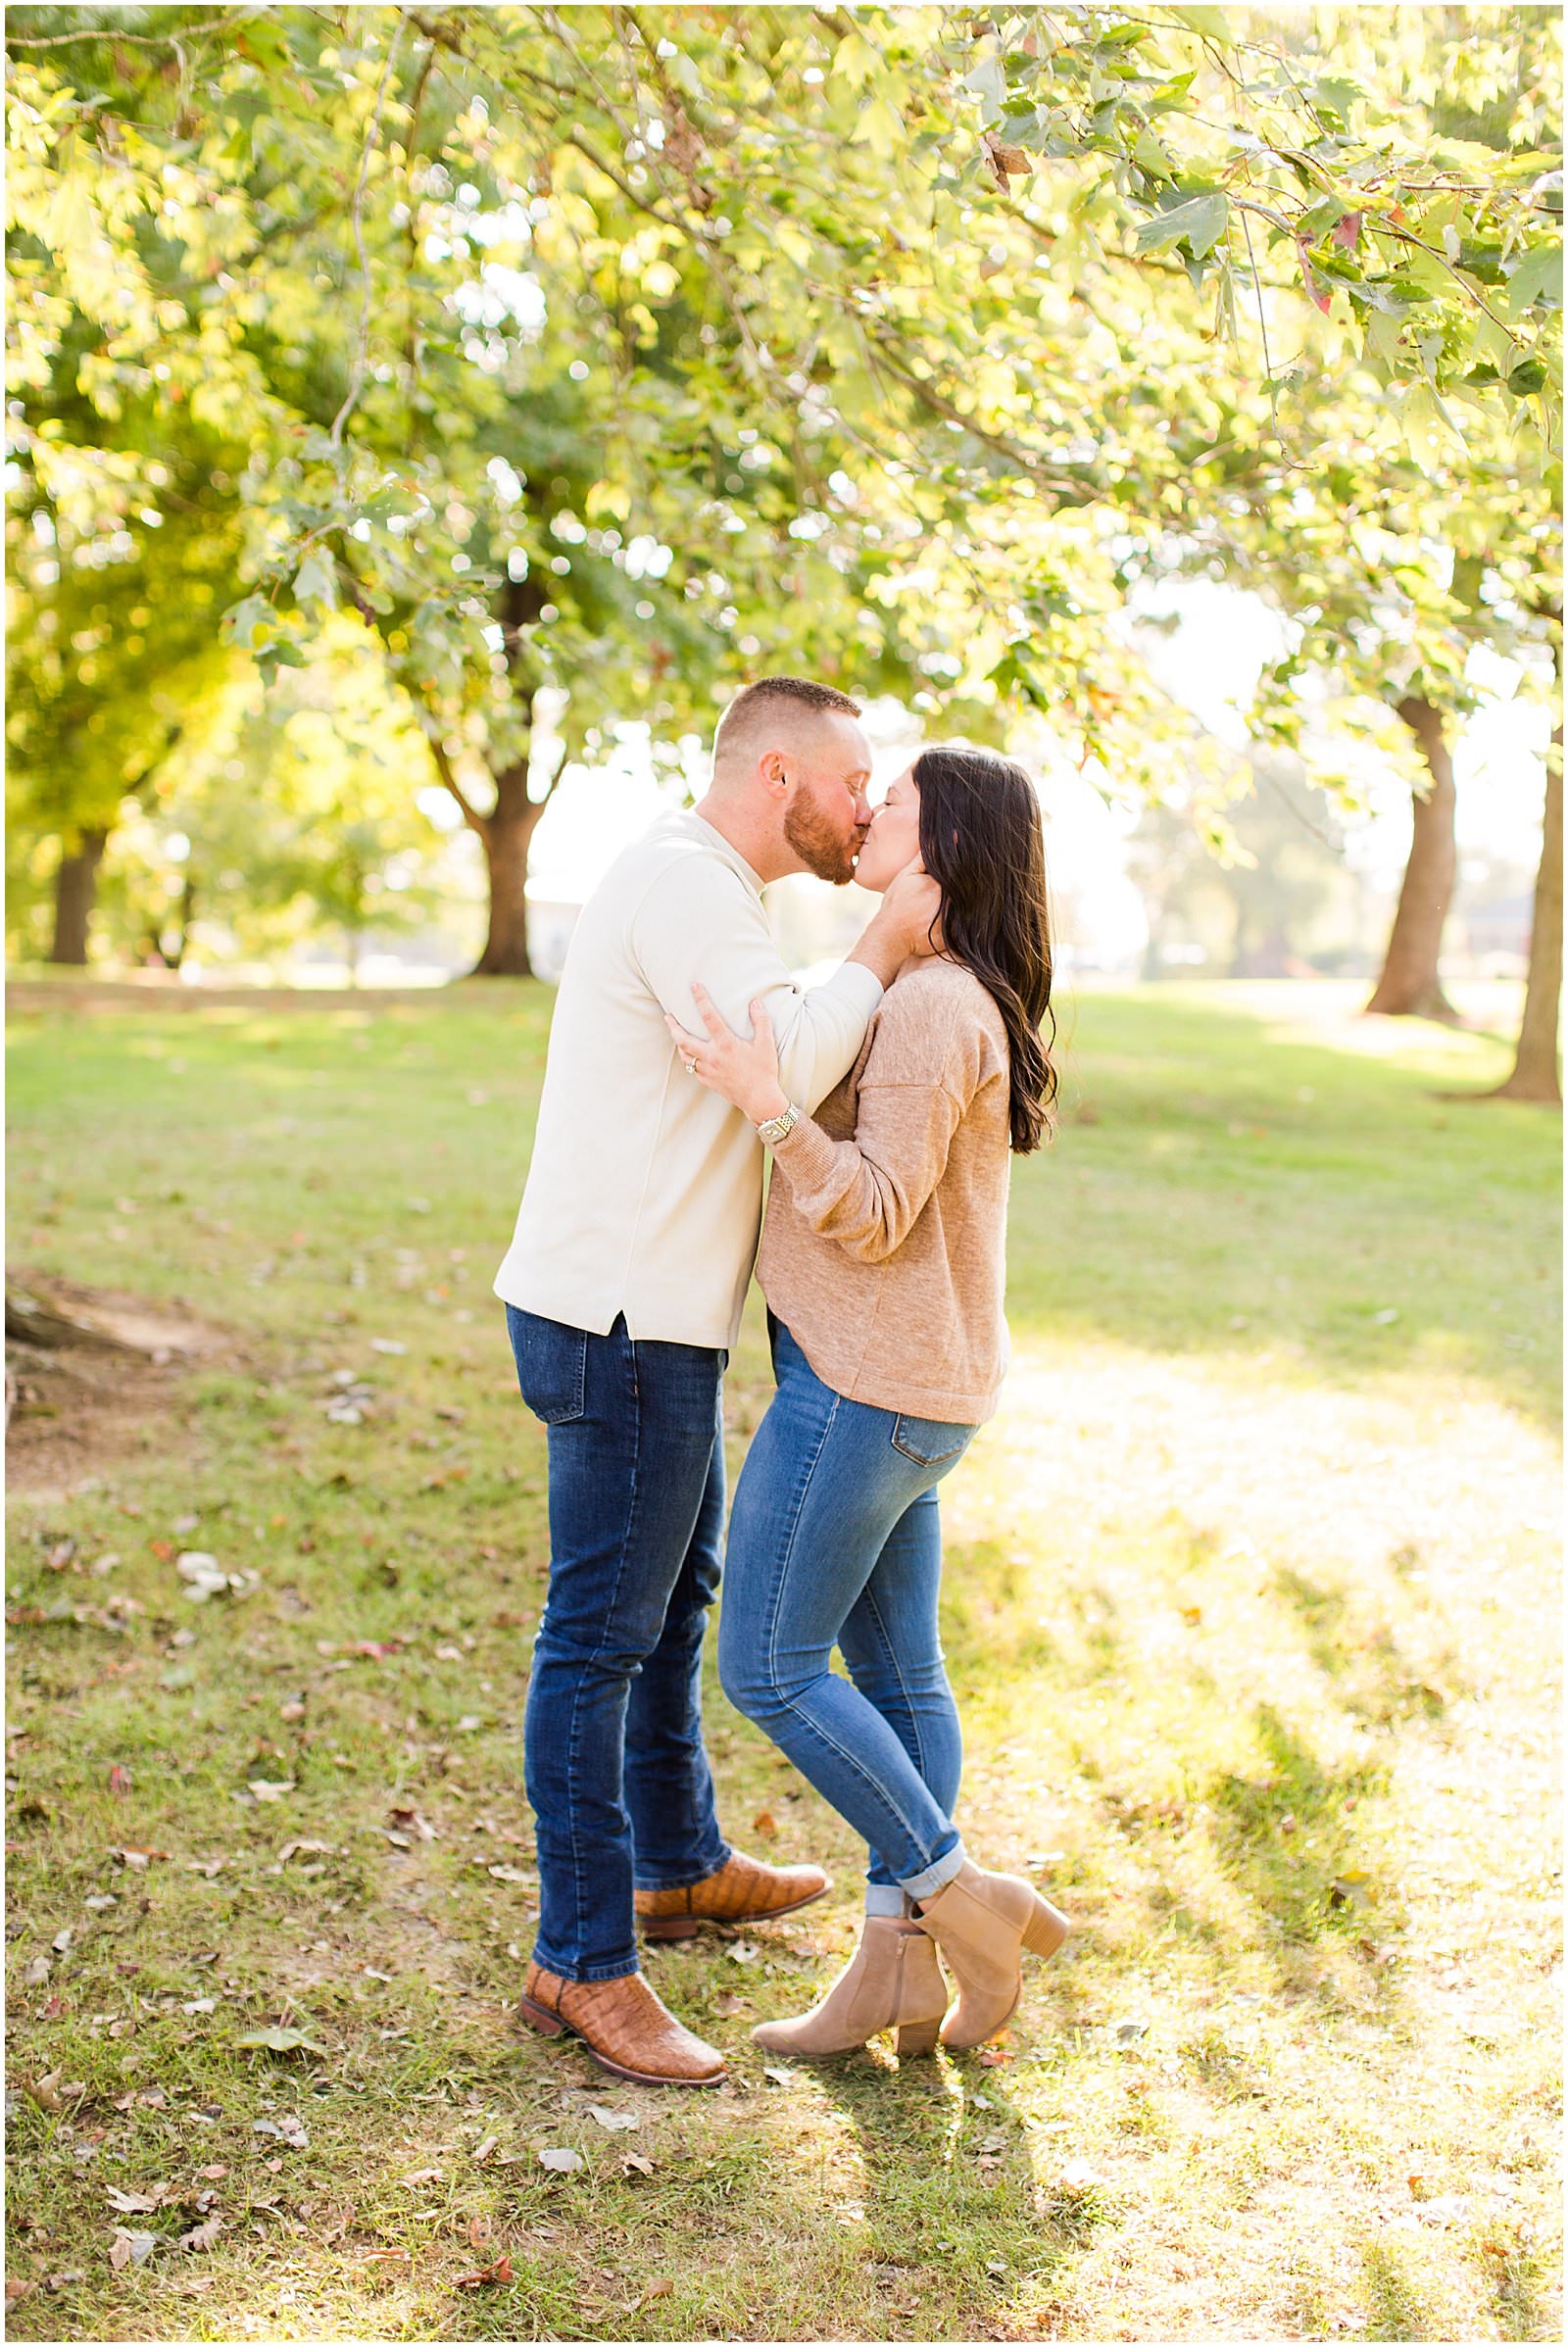 A Rolling Hills Country Club Engagement Session | Meagan and Kyle | Bret and Brandie Photography 0015.jpg